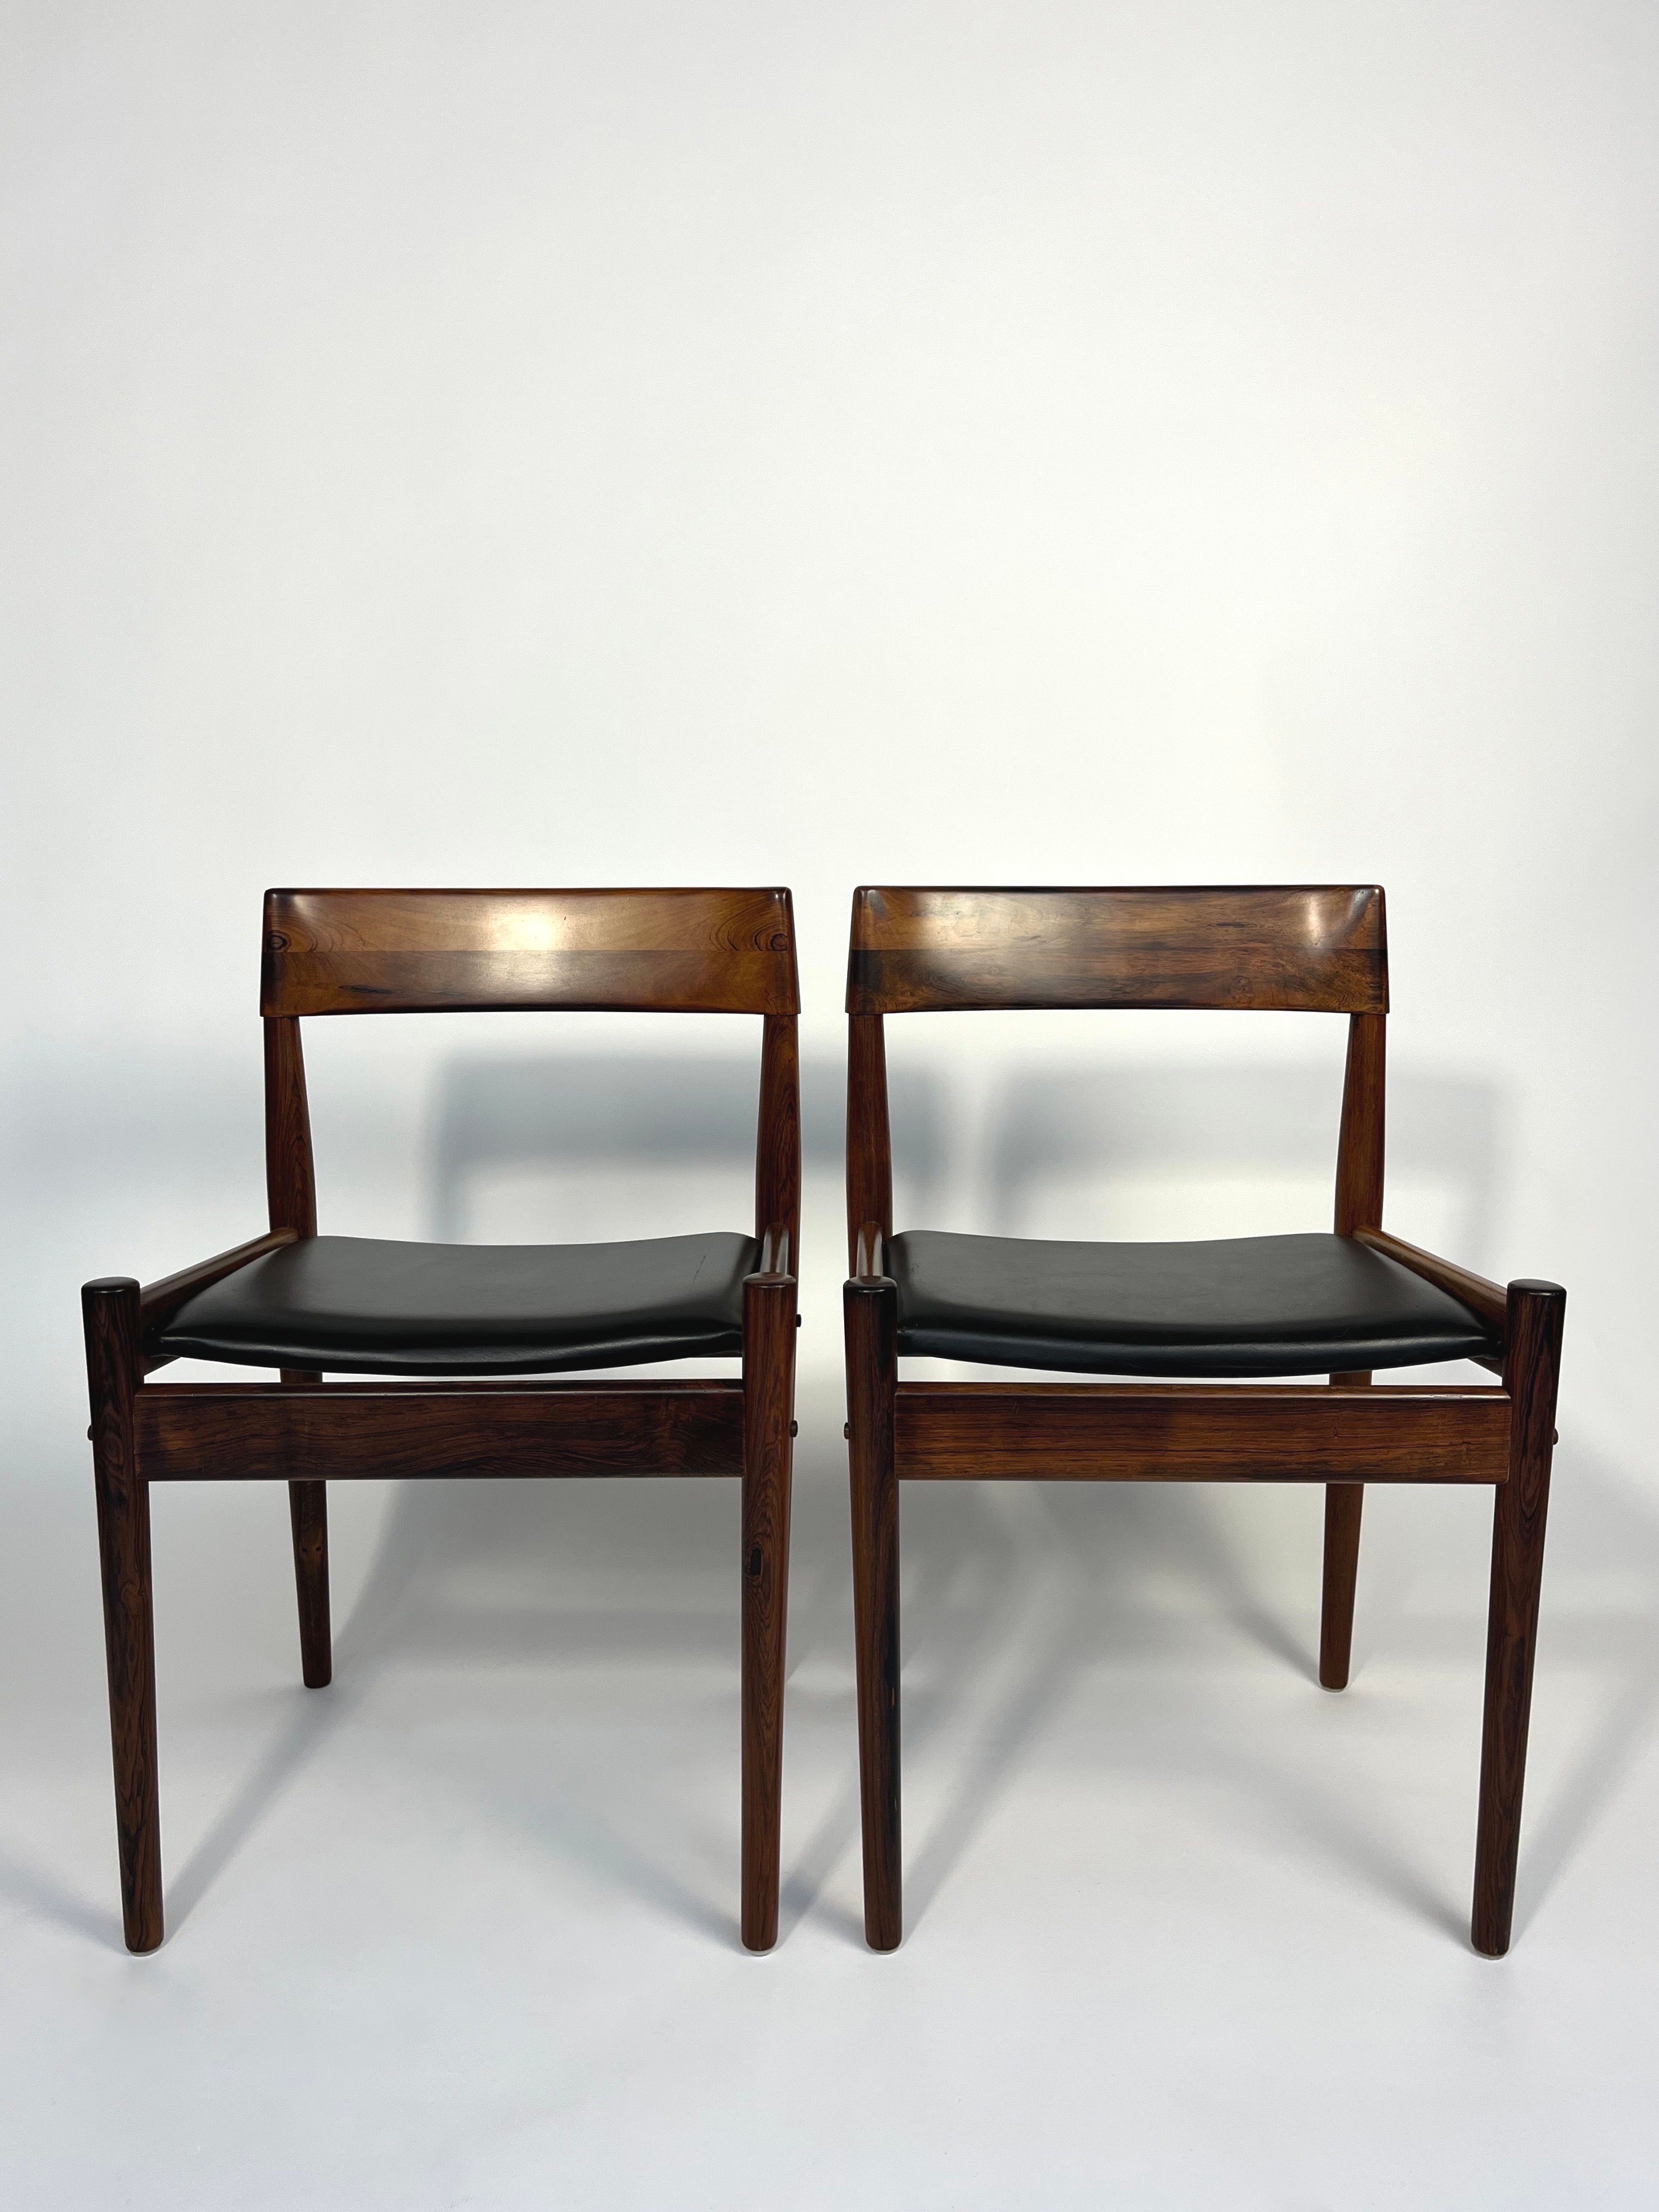 Set of two beautiful dining chairs designed by Grete Jalk for P. Jeppesen. Model No. PJ4-2, made in Denmark in the early 1960s.

Solid rosewood frame with a beautiful grain, refinished with laquer. Upholstered in black leather.

